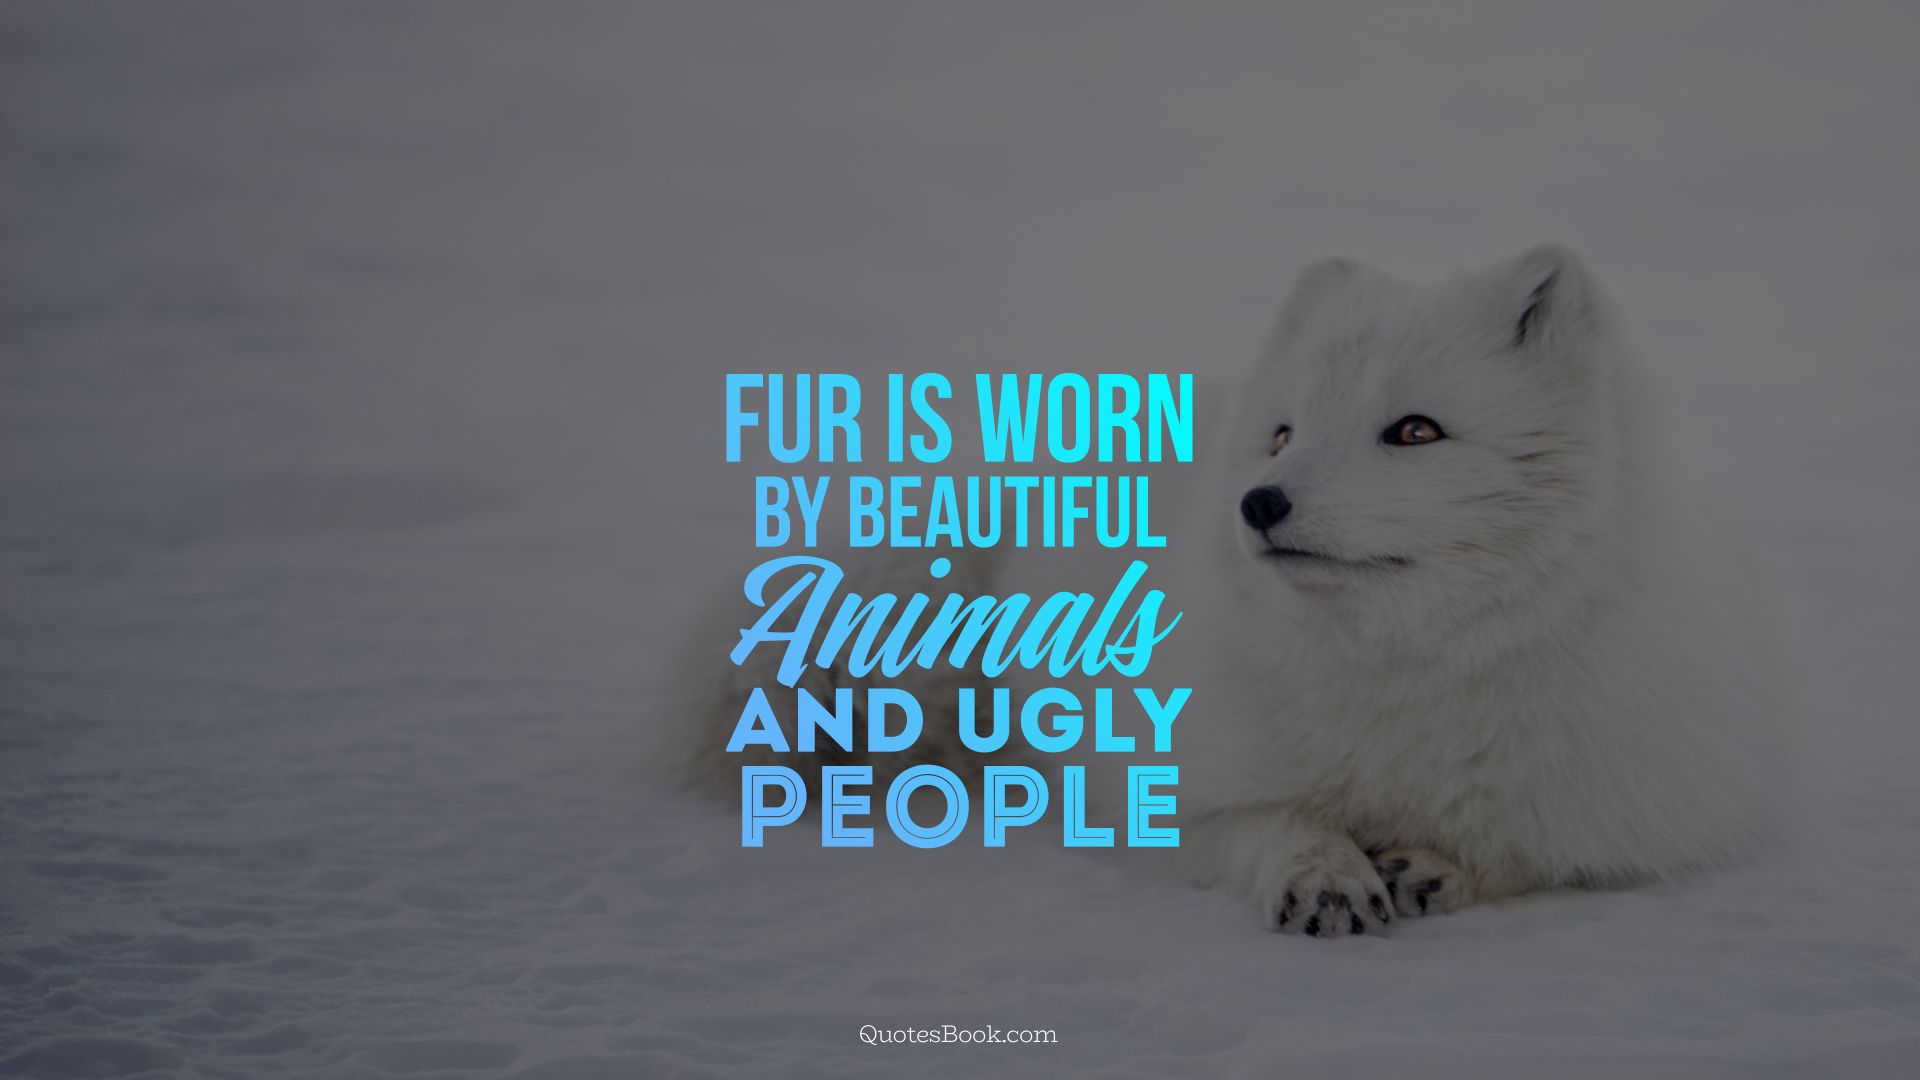 Fur is worn by beautiful animals and ugly people